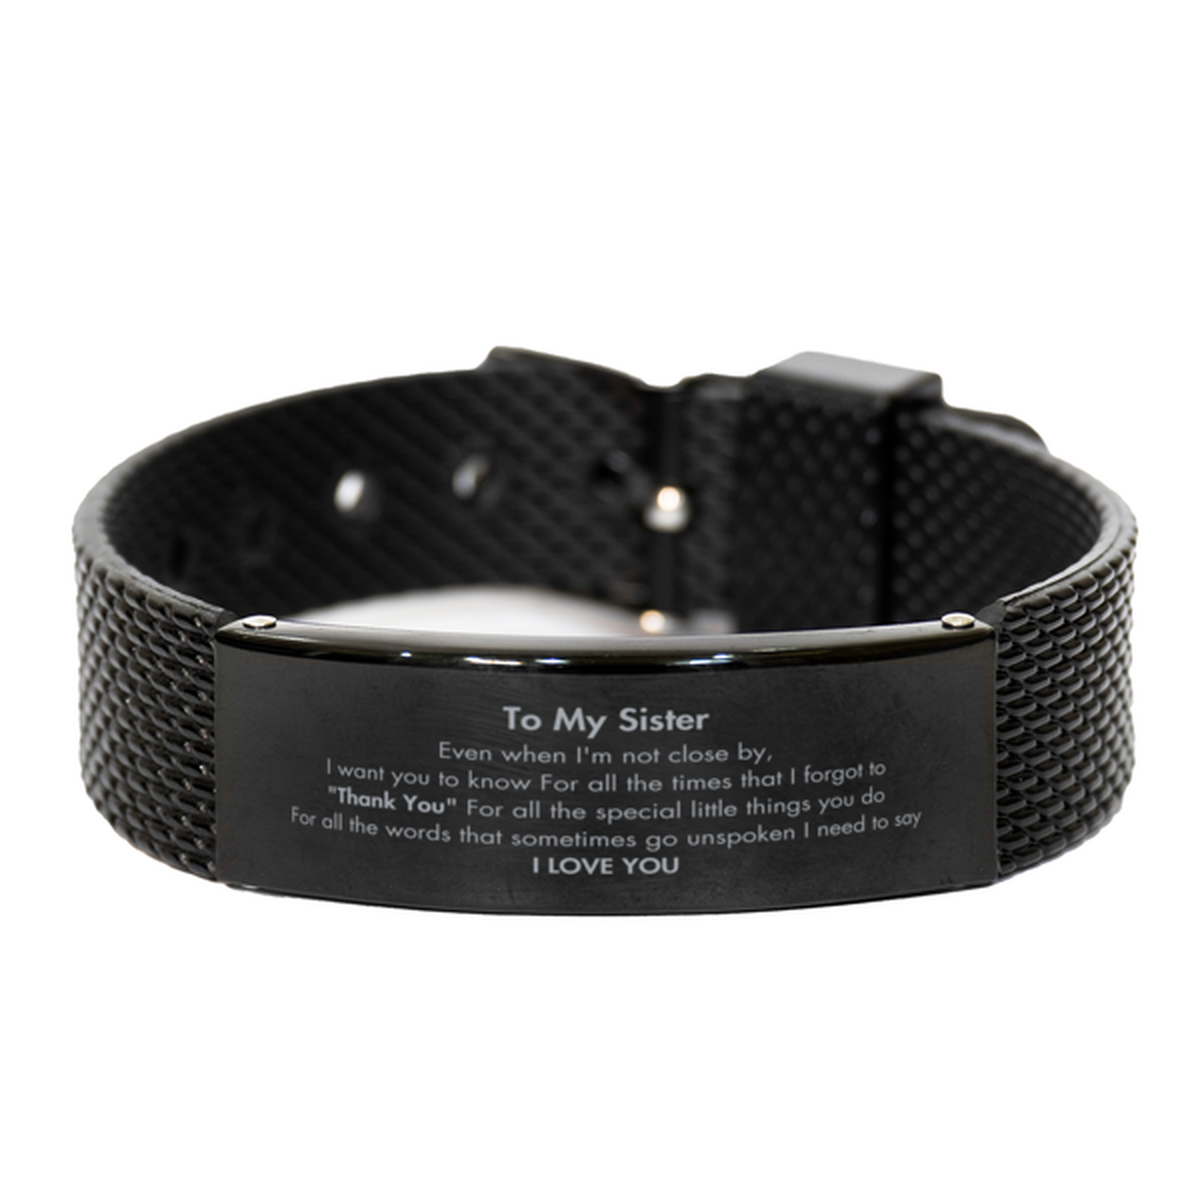 Thank You Gifts for Sister, Keepsake Black Shark Mesh Bracelet Gifts for Sister Birthday Mother's day Father's Day Sister For all the words That sometimes go unspoken I need to say I LOVE YOU